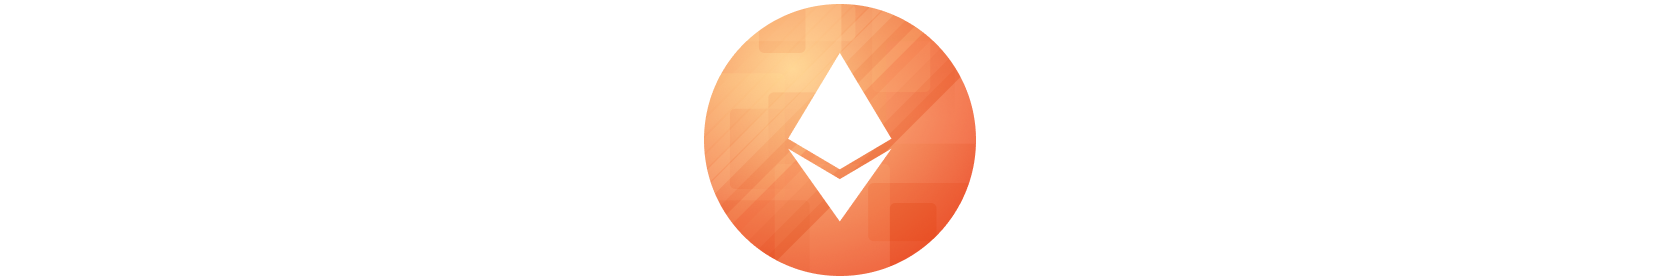 Staked ETH: 738k   Market share: 7.72%   30d change: +23.77%